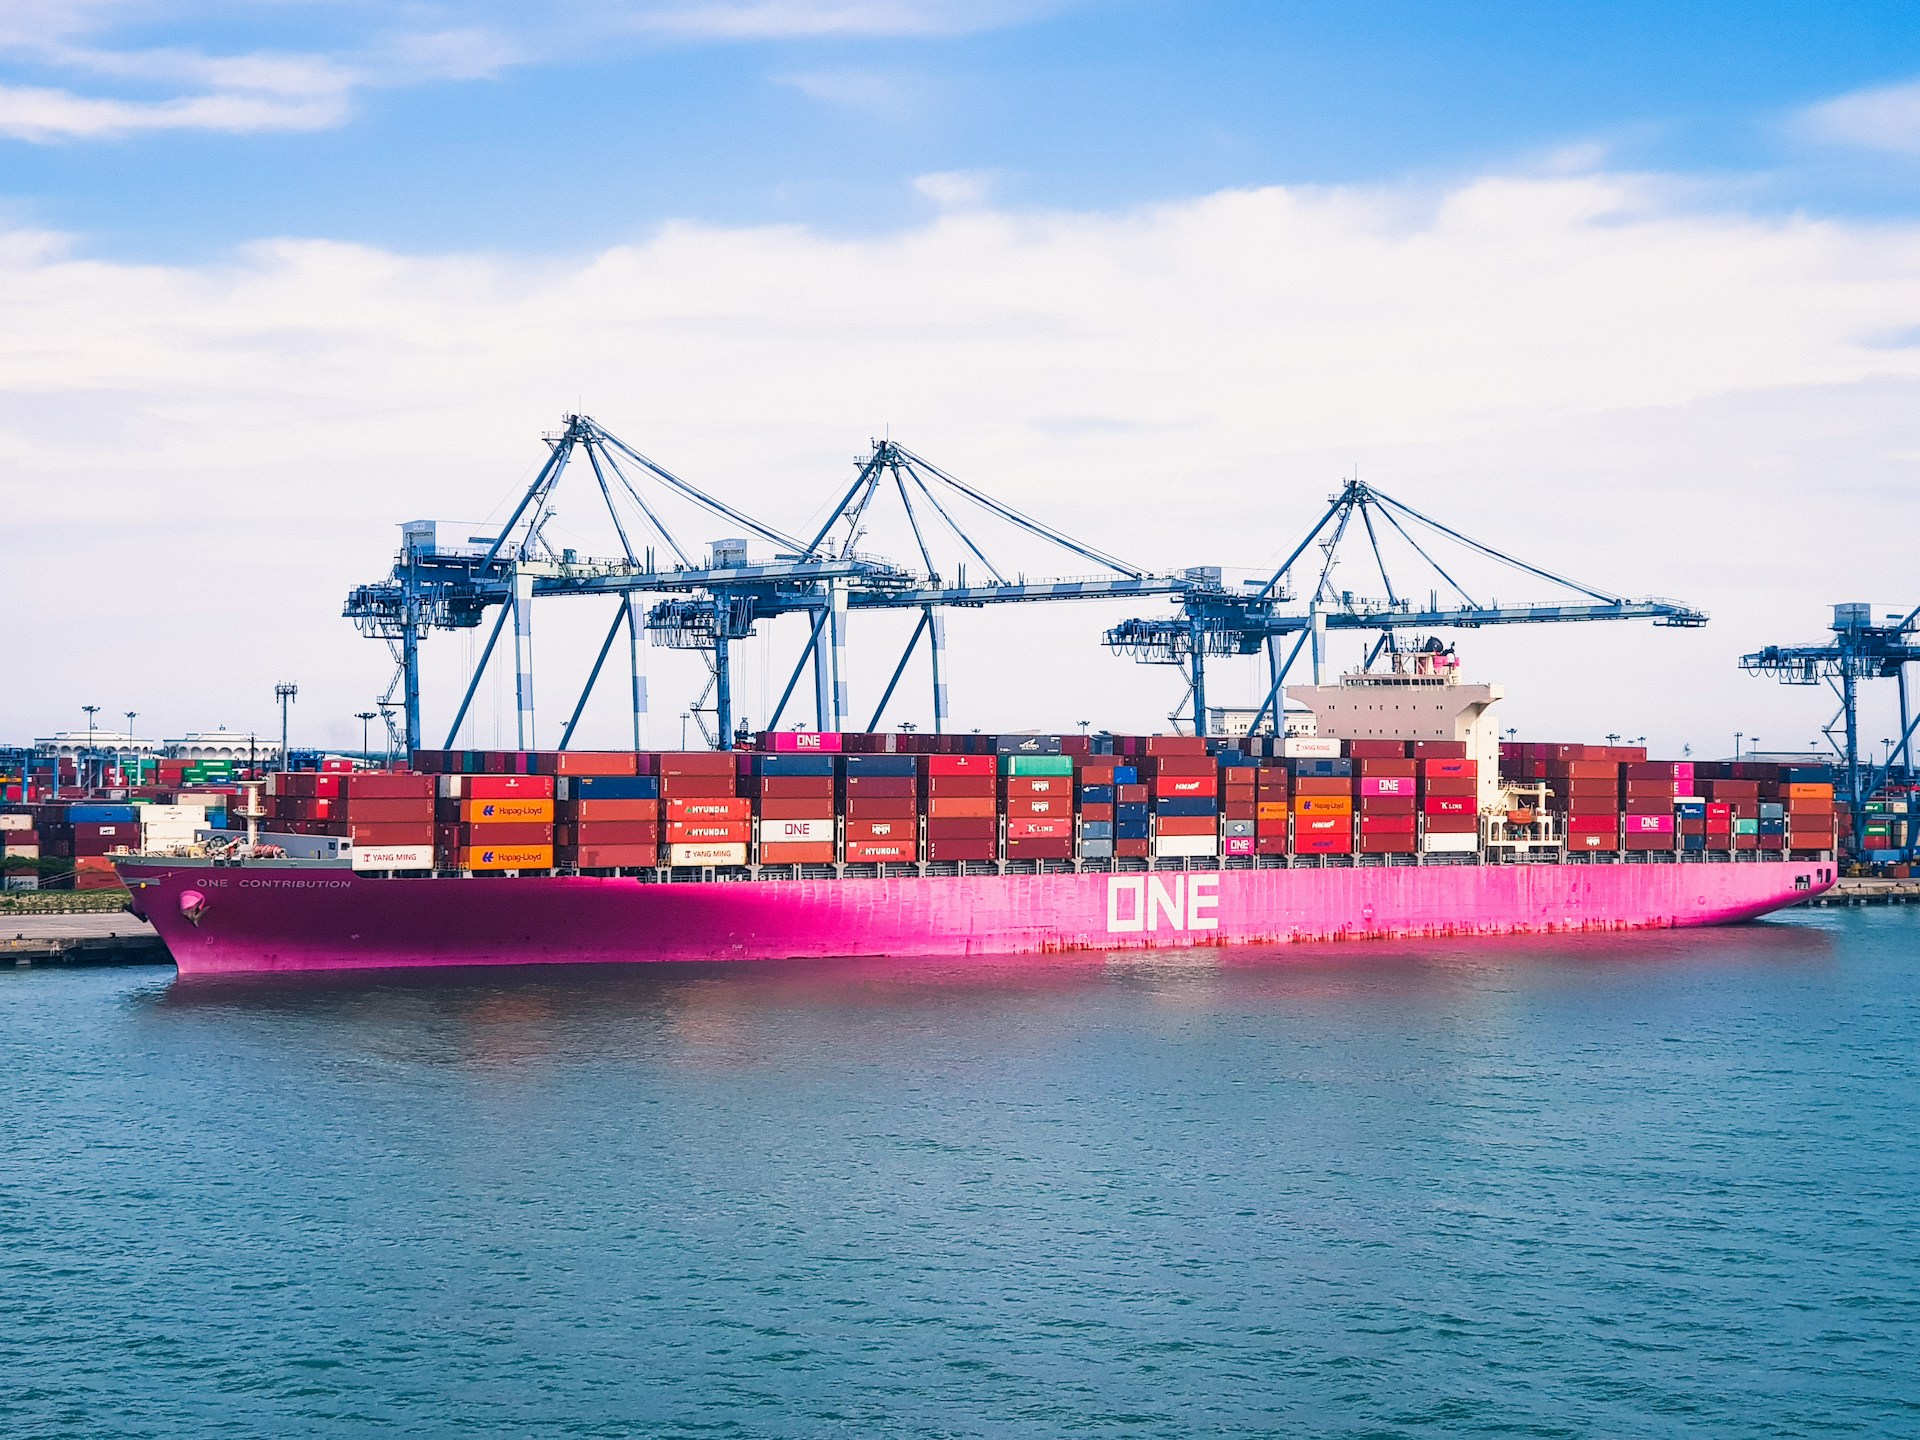 ONE Announces Plan to Expand Fleet to 3m TEU by 2030